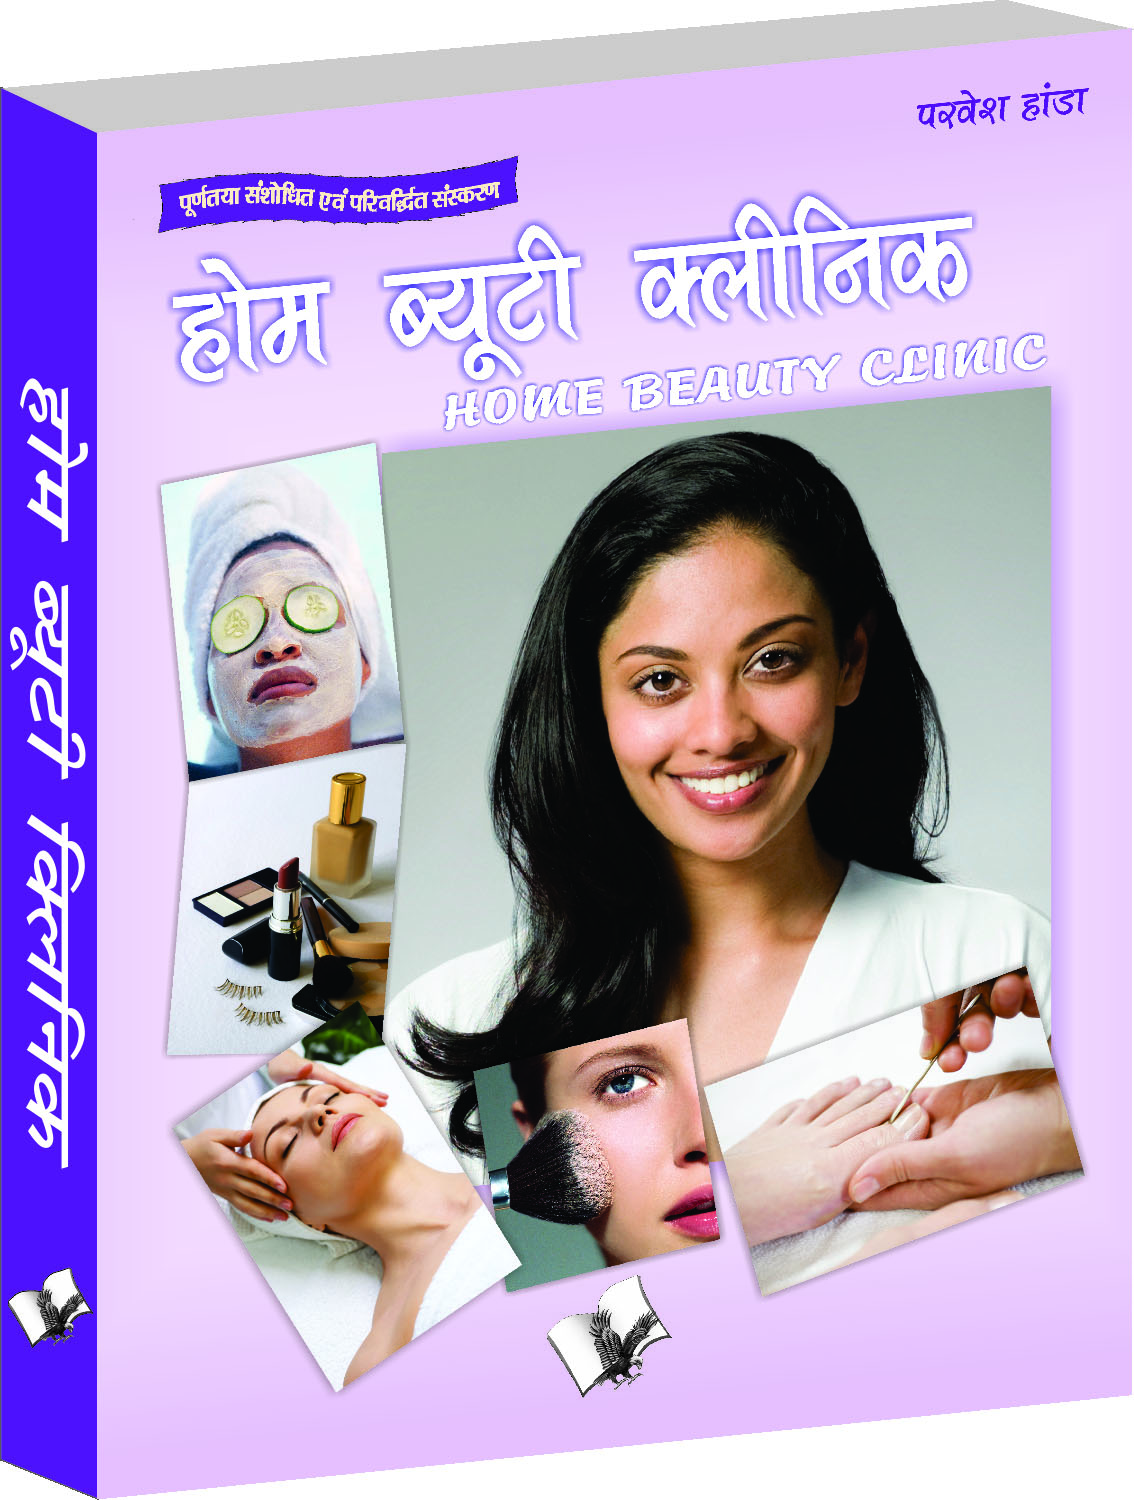 Home Beauty Clinic (Hindi)-Natural products to sharpen your features and attractiveness, in Hindi